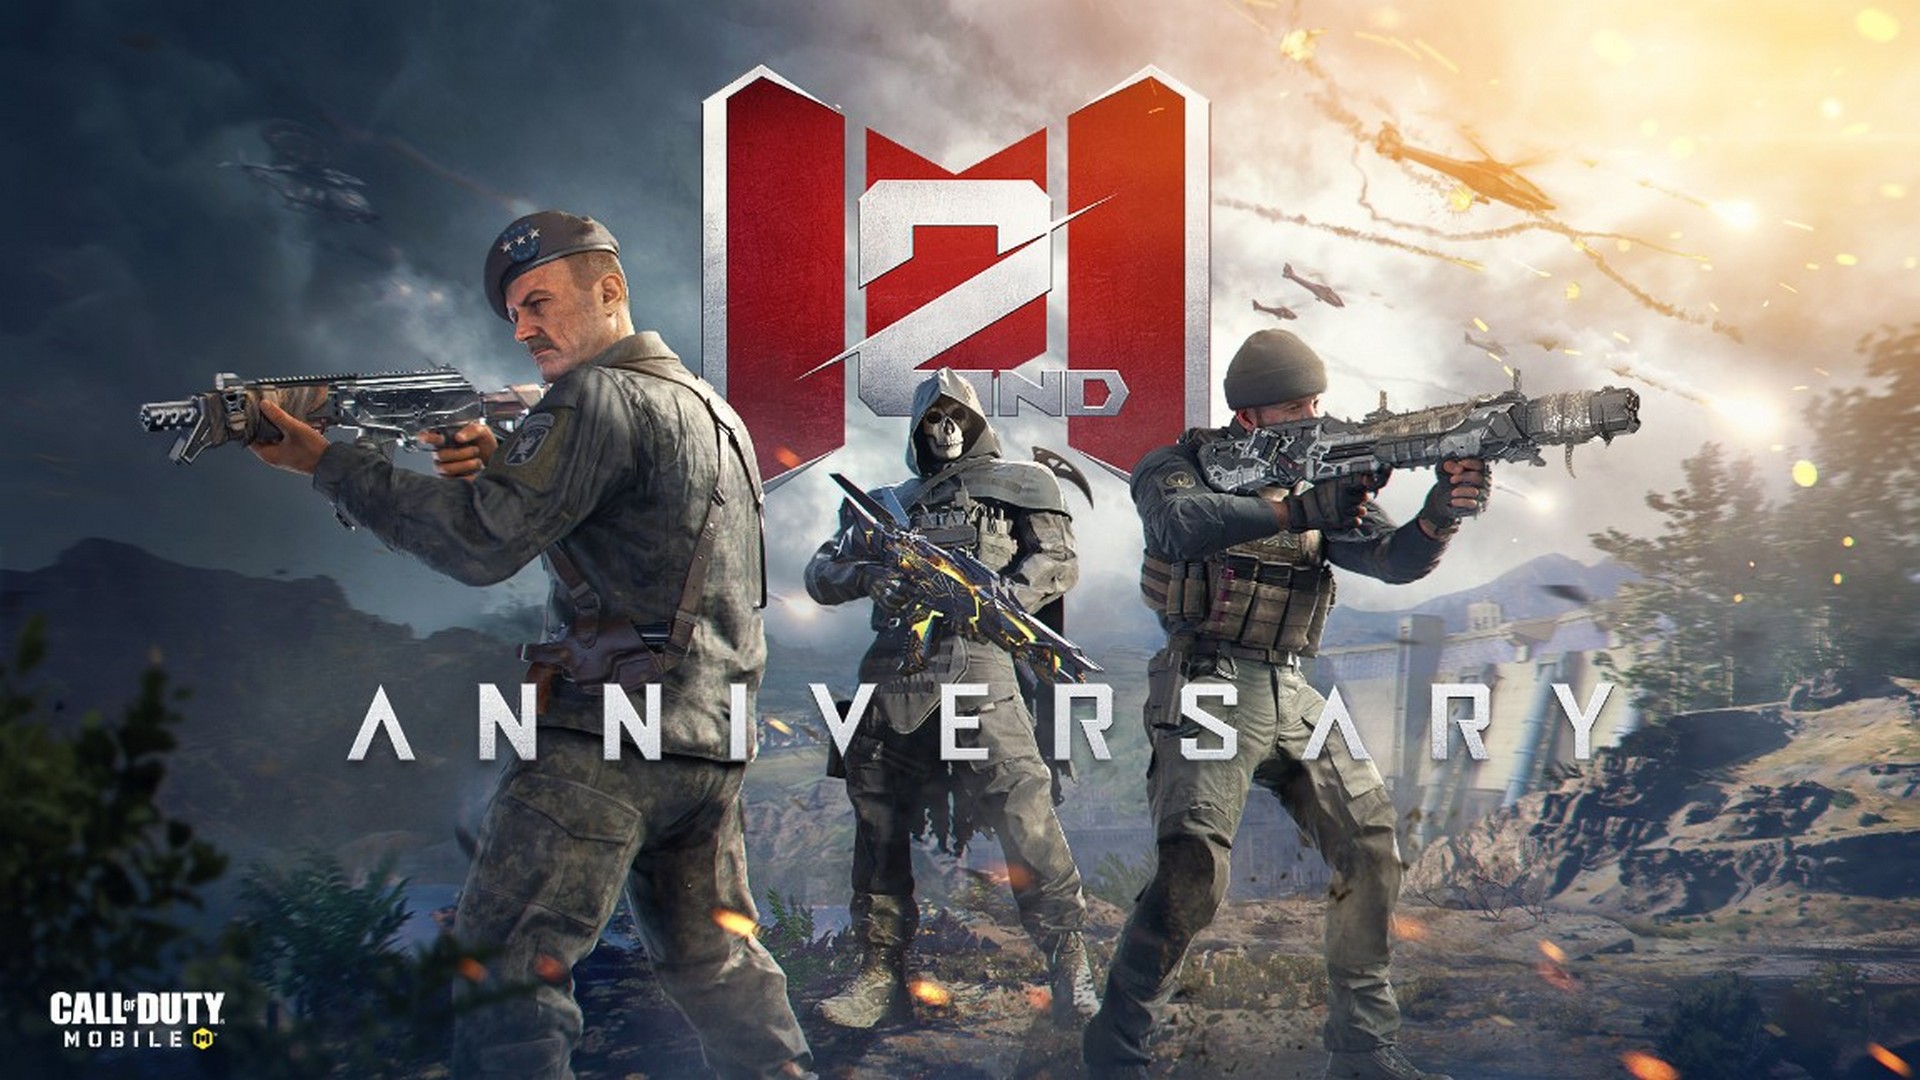 Blackout Returns For Call of Duty: Mobile’s 2nd Anniversary